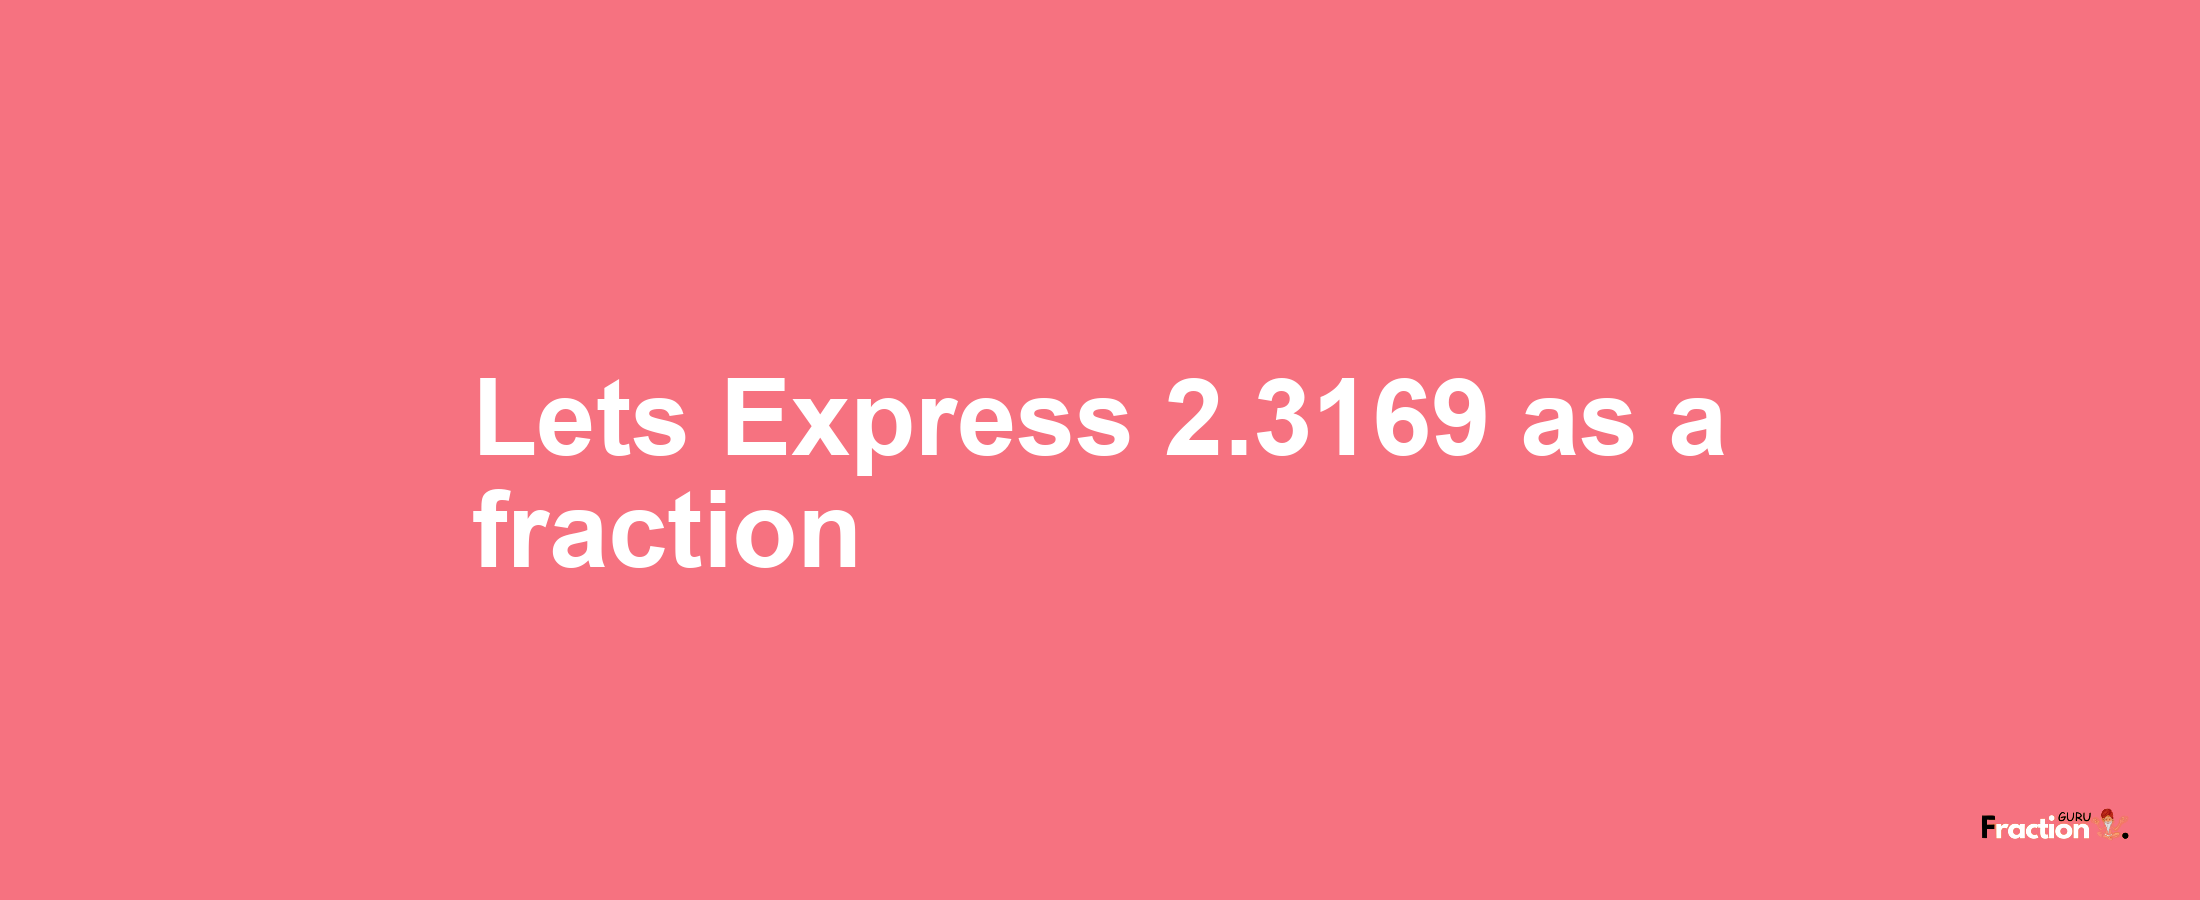 Lets Express 2.3169 as afraction